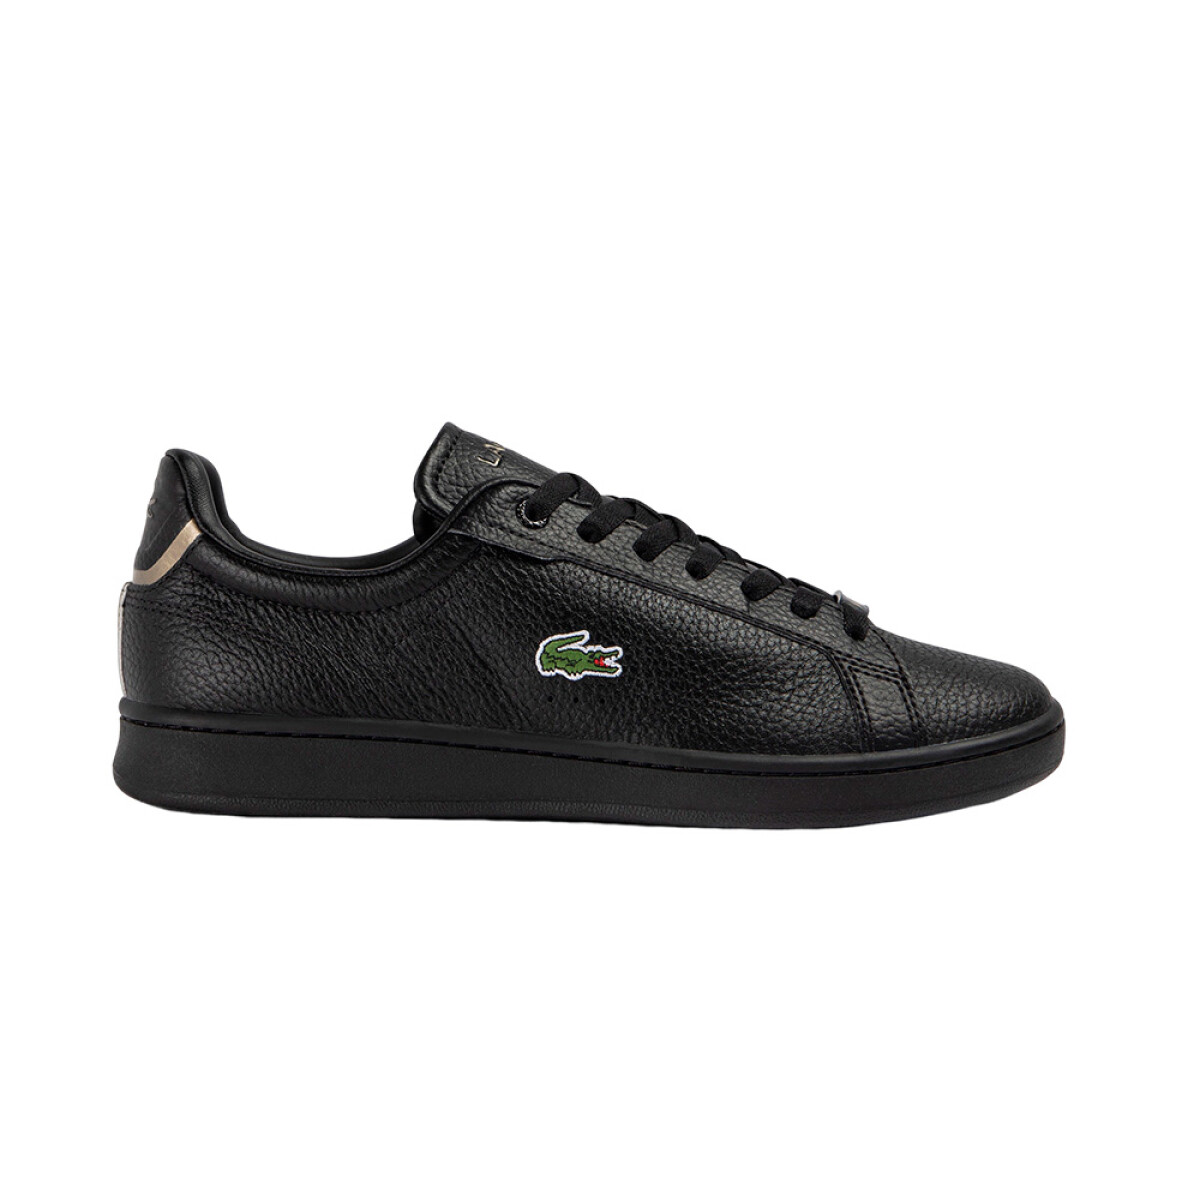 LACOSTE CARNABY PRO - 02H 